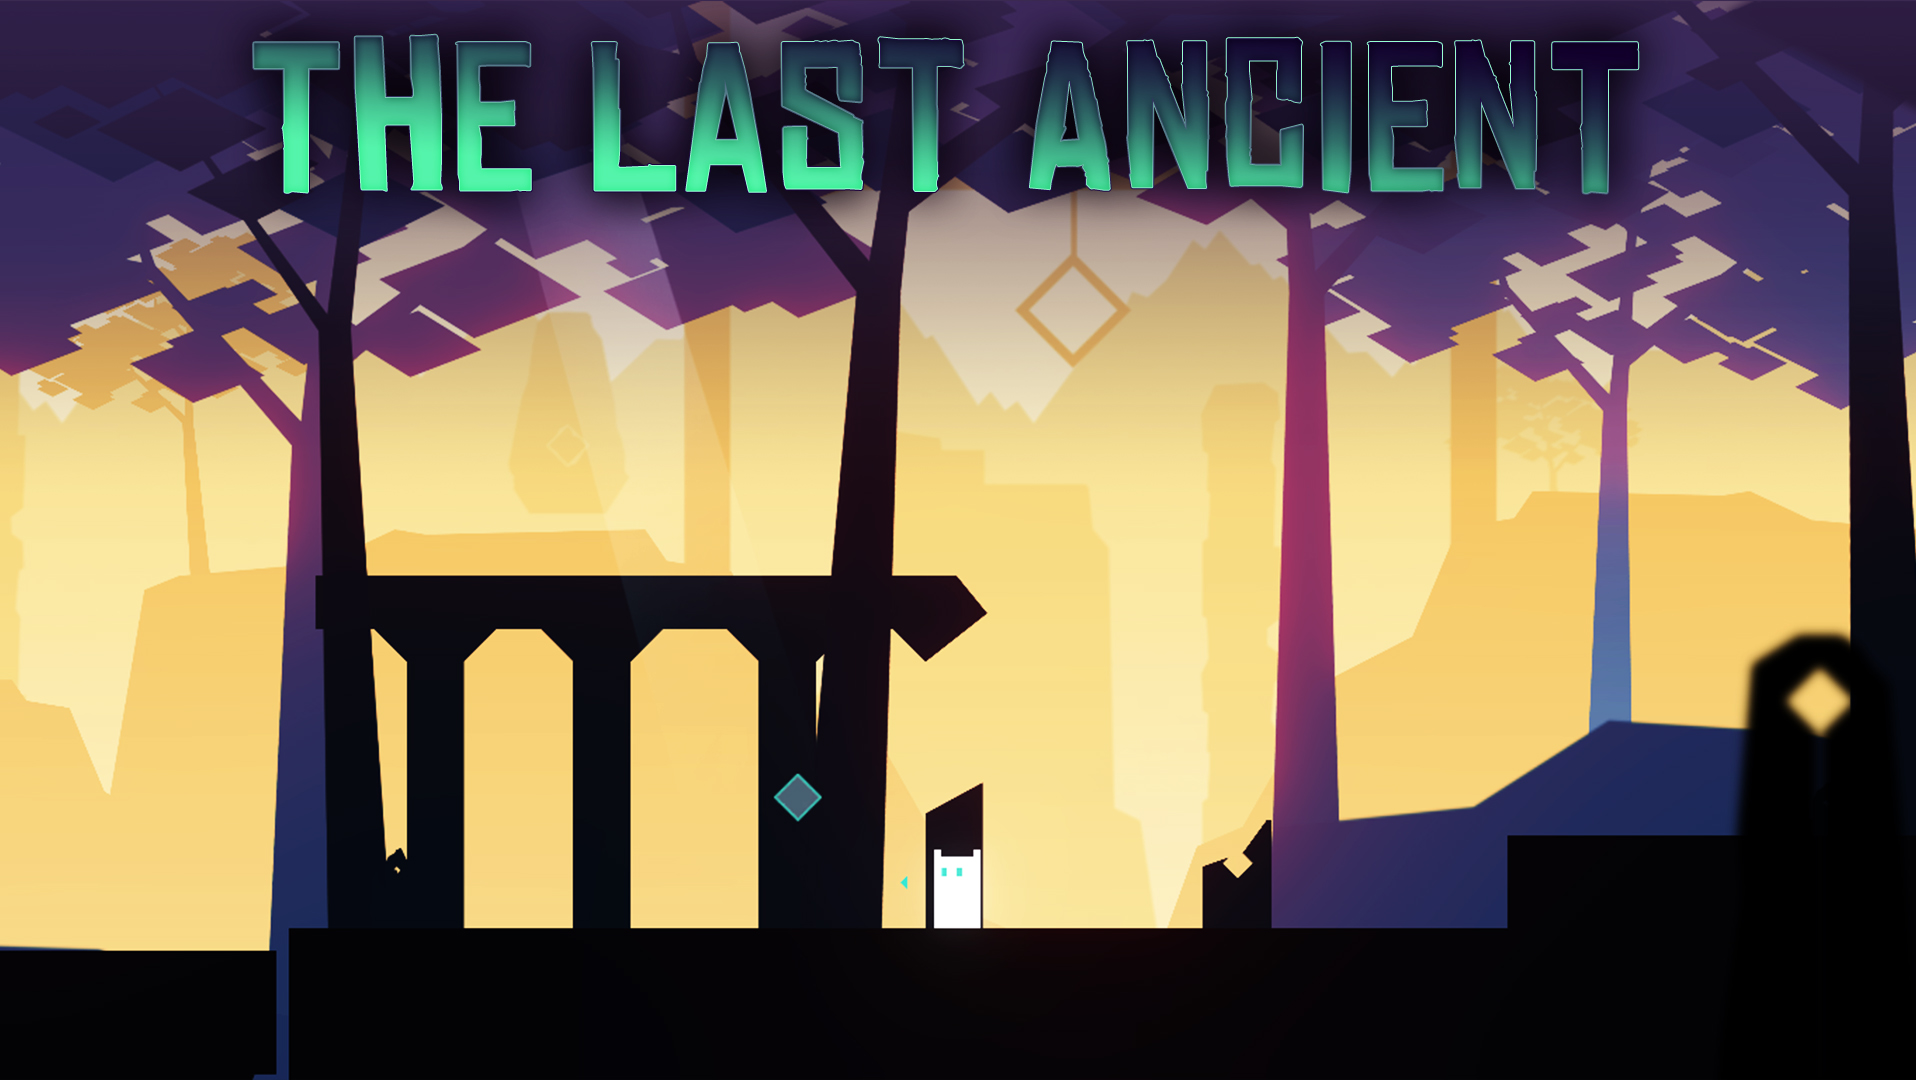 The Last Ancient